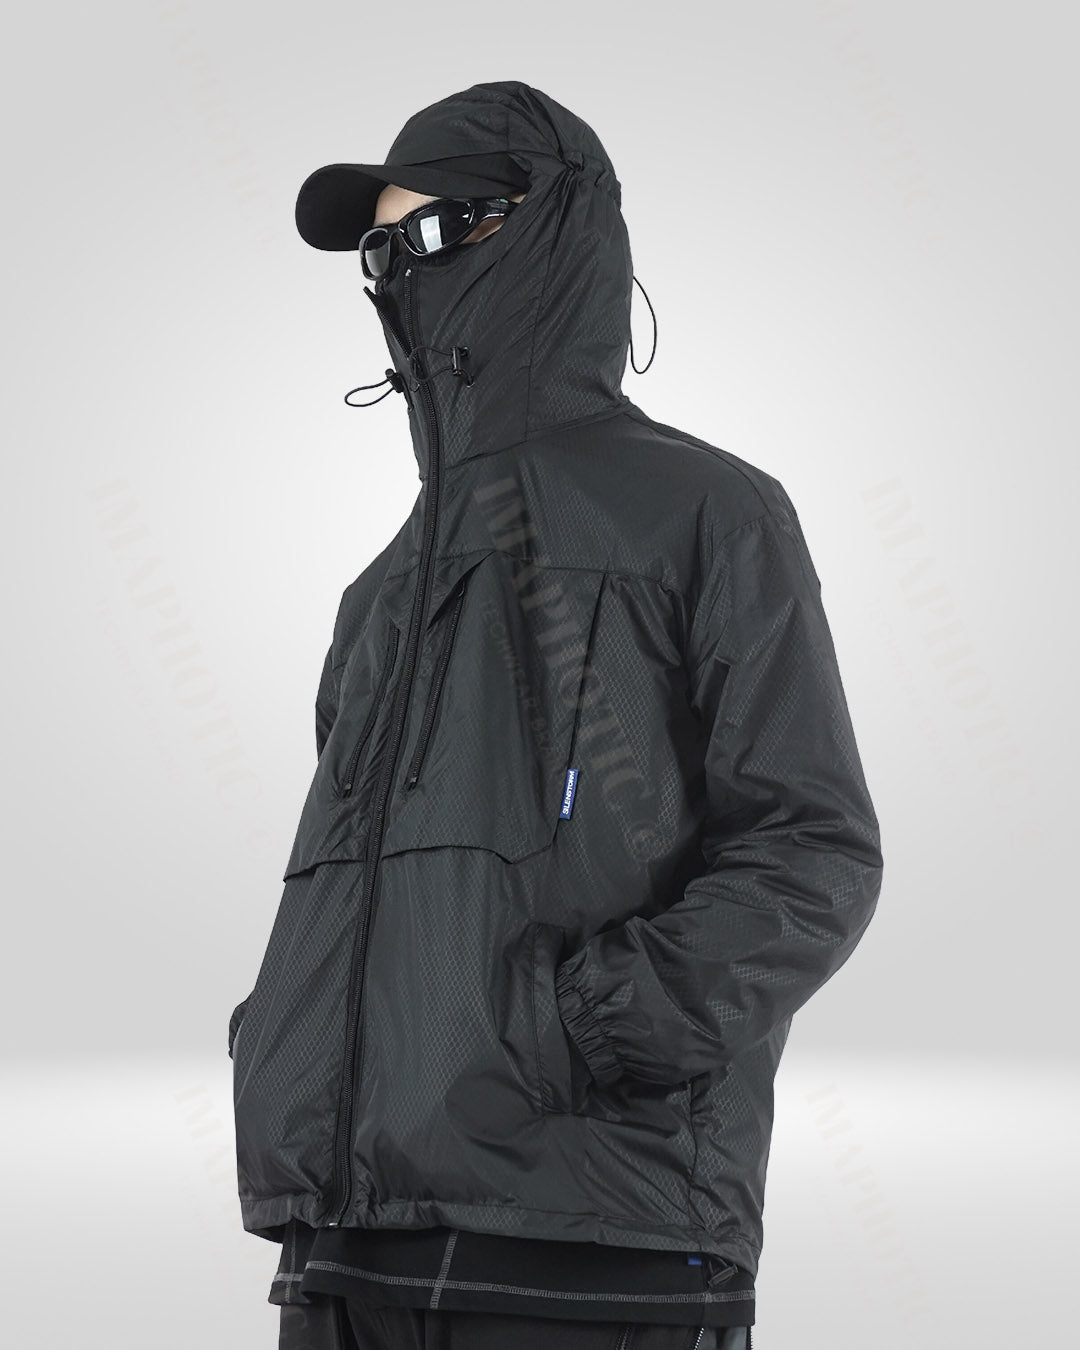 Black Sun Protection Jacket - UV Protection Lightweight Outdoor